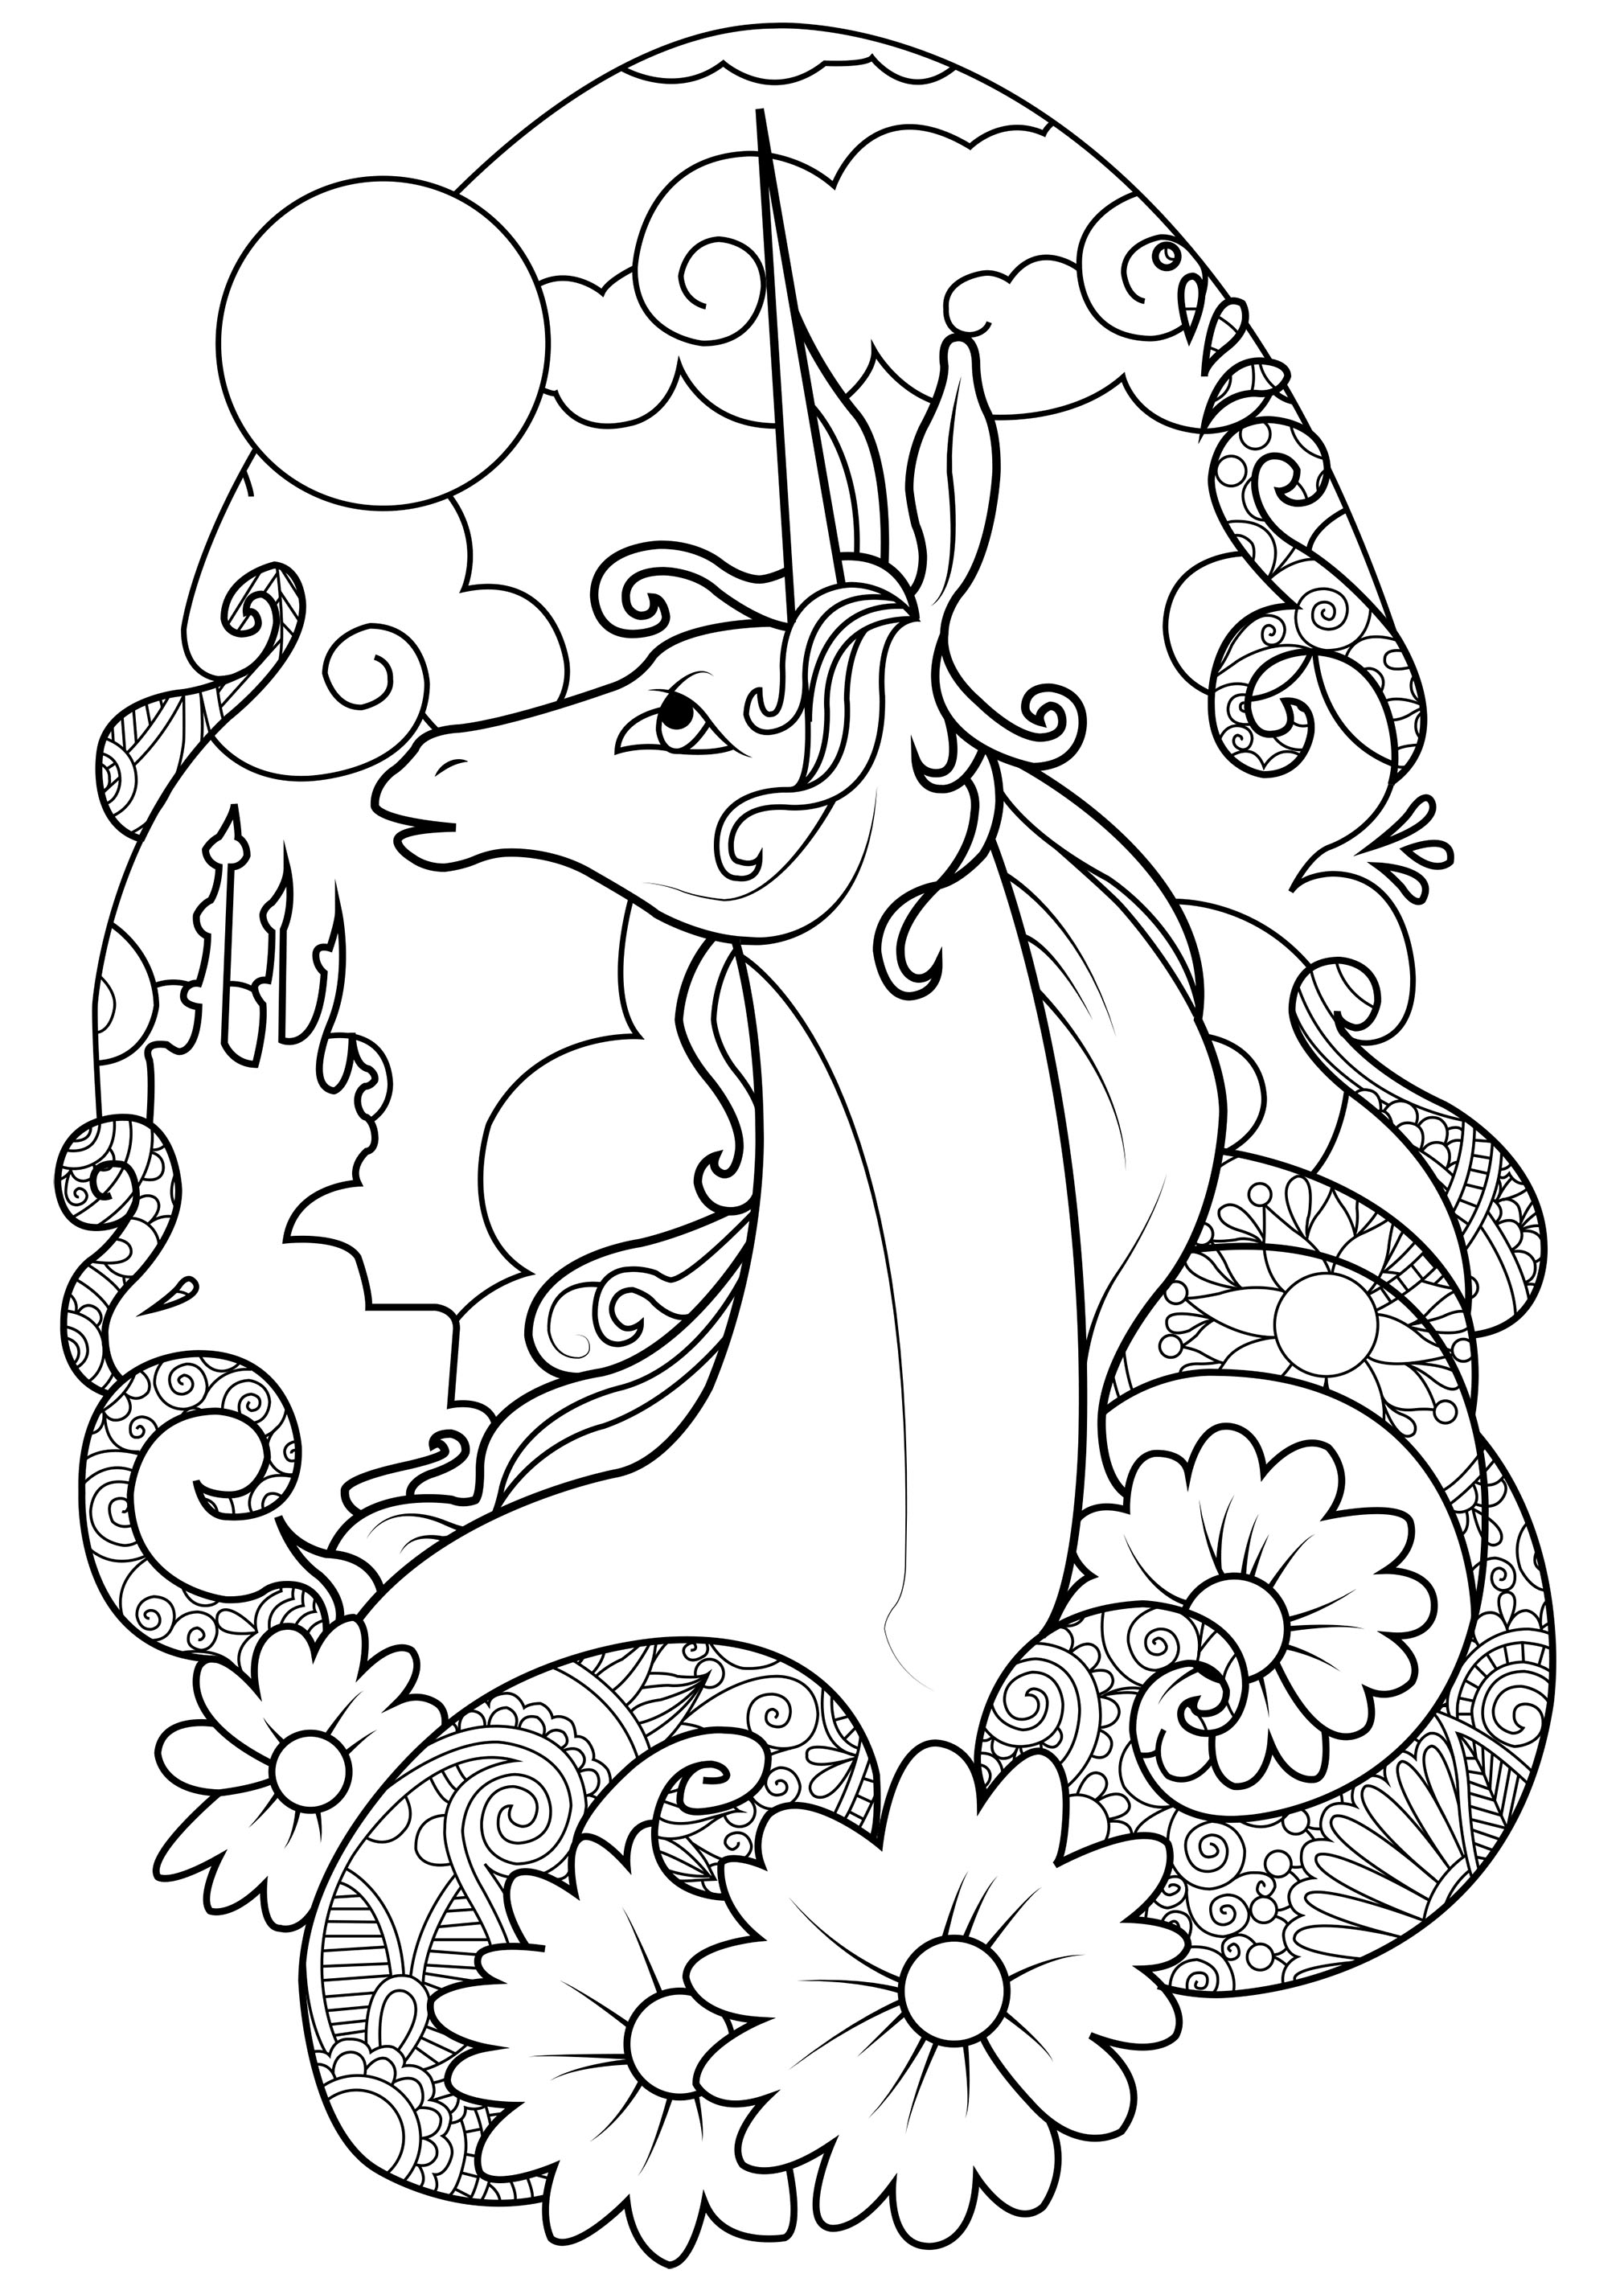 Download Unicorns - Free Colouring Pages